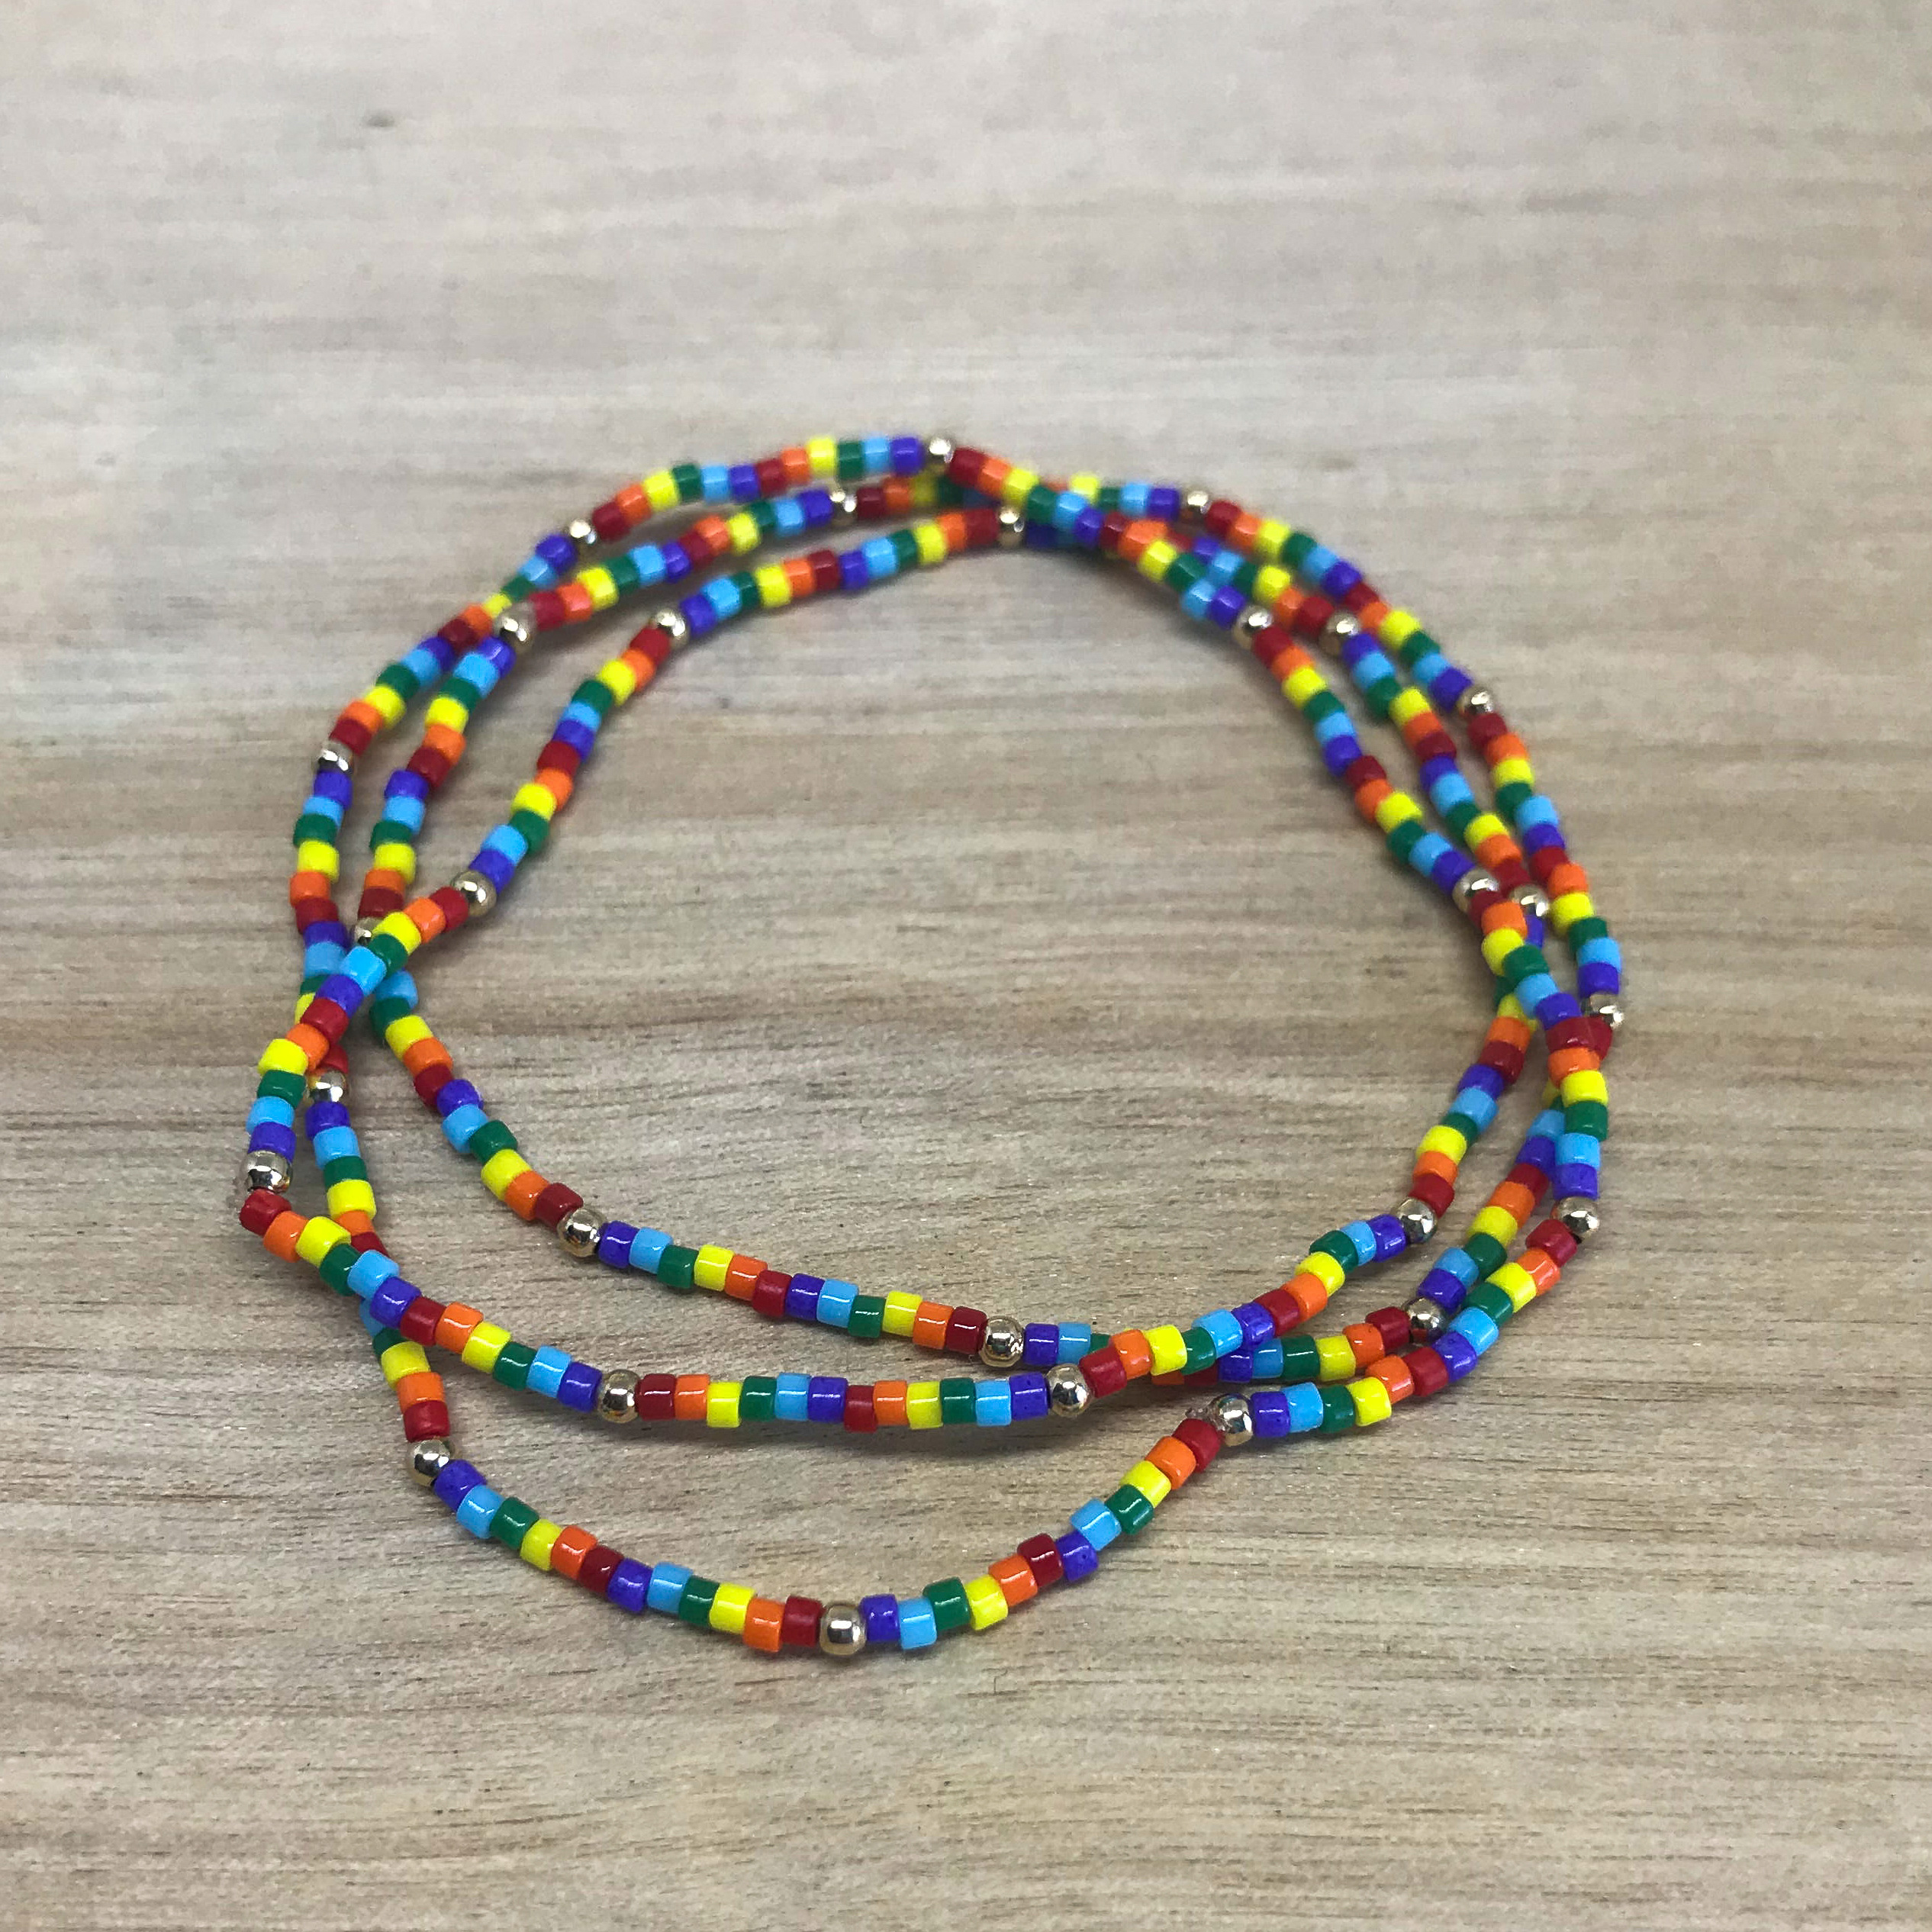 Rainbow Bracelet Seed Bead Jewelry. Japanese Delica Glass Beads with Gold  Filled Stretch Bracelet. Made in USA – Just Bead It